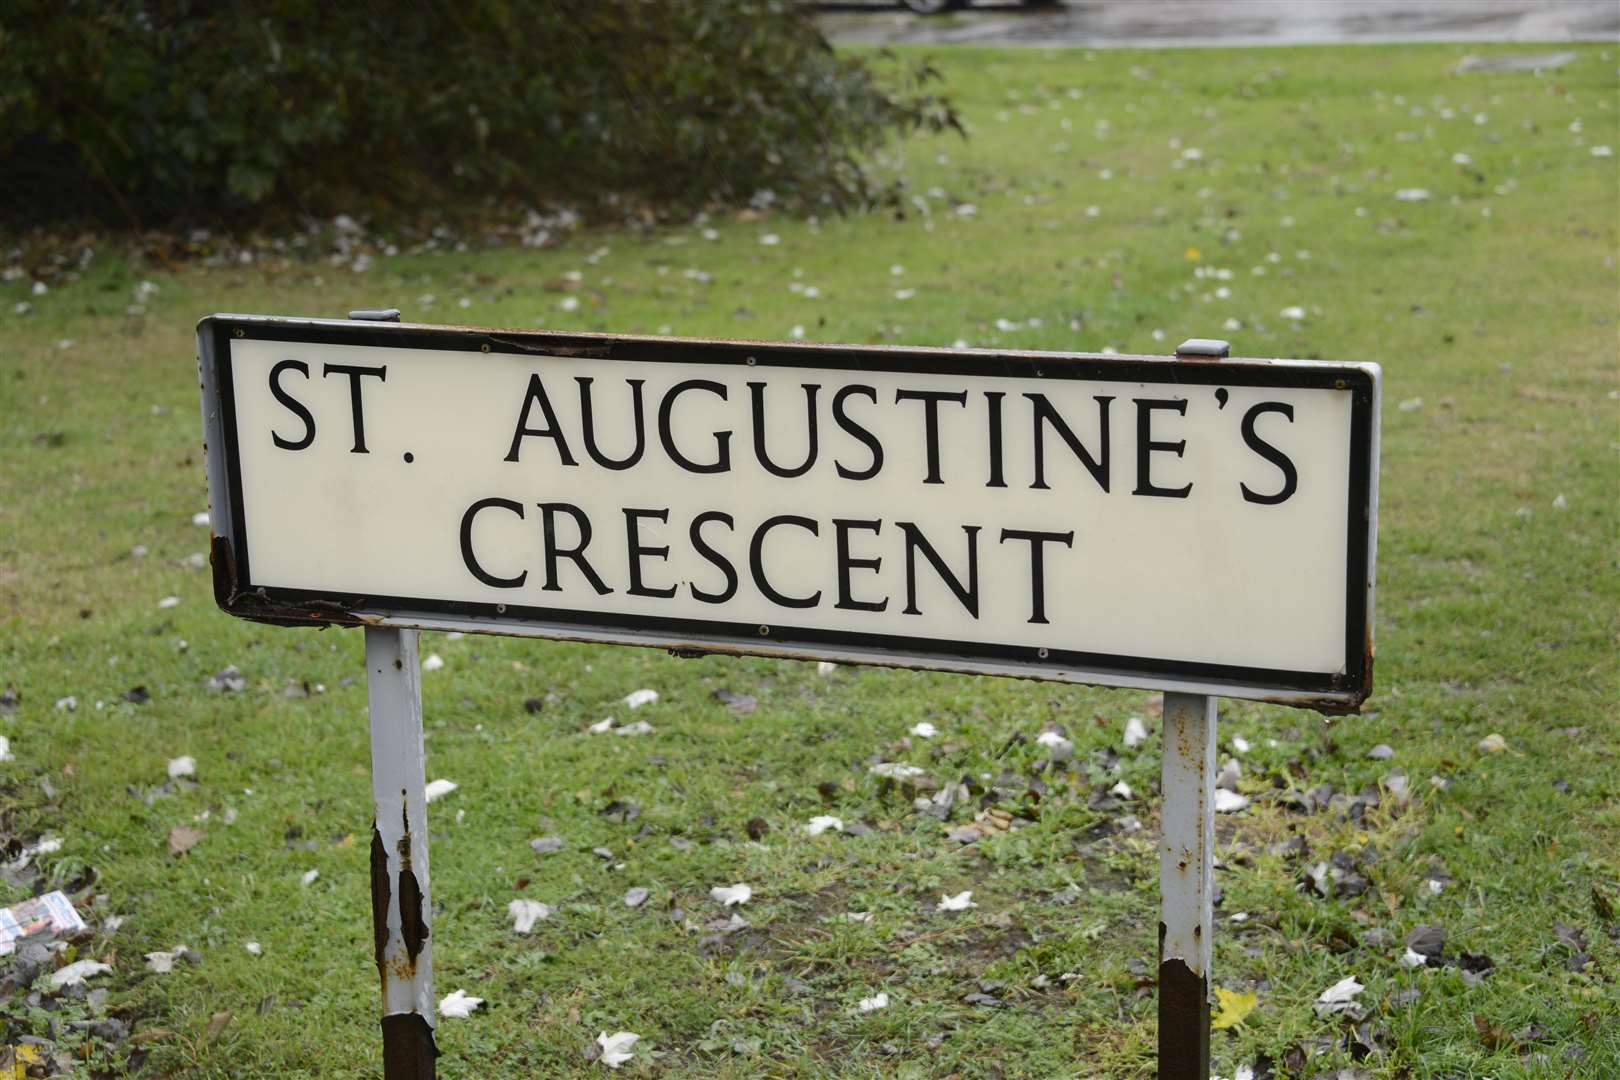 Susan Baines died after living in St Augustine’s Crescent with no heating. Picture: Paul Amos